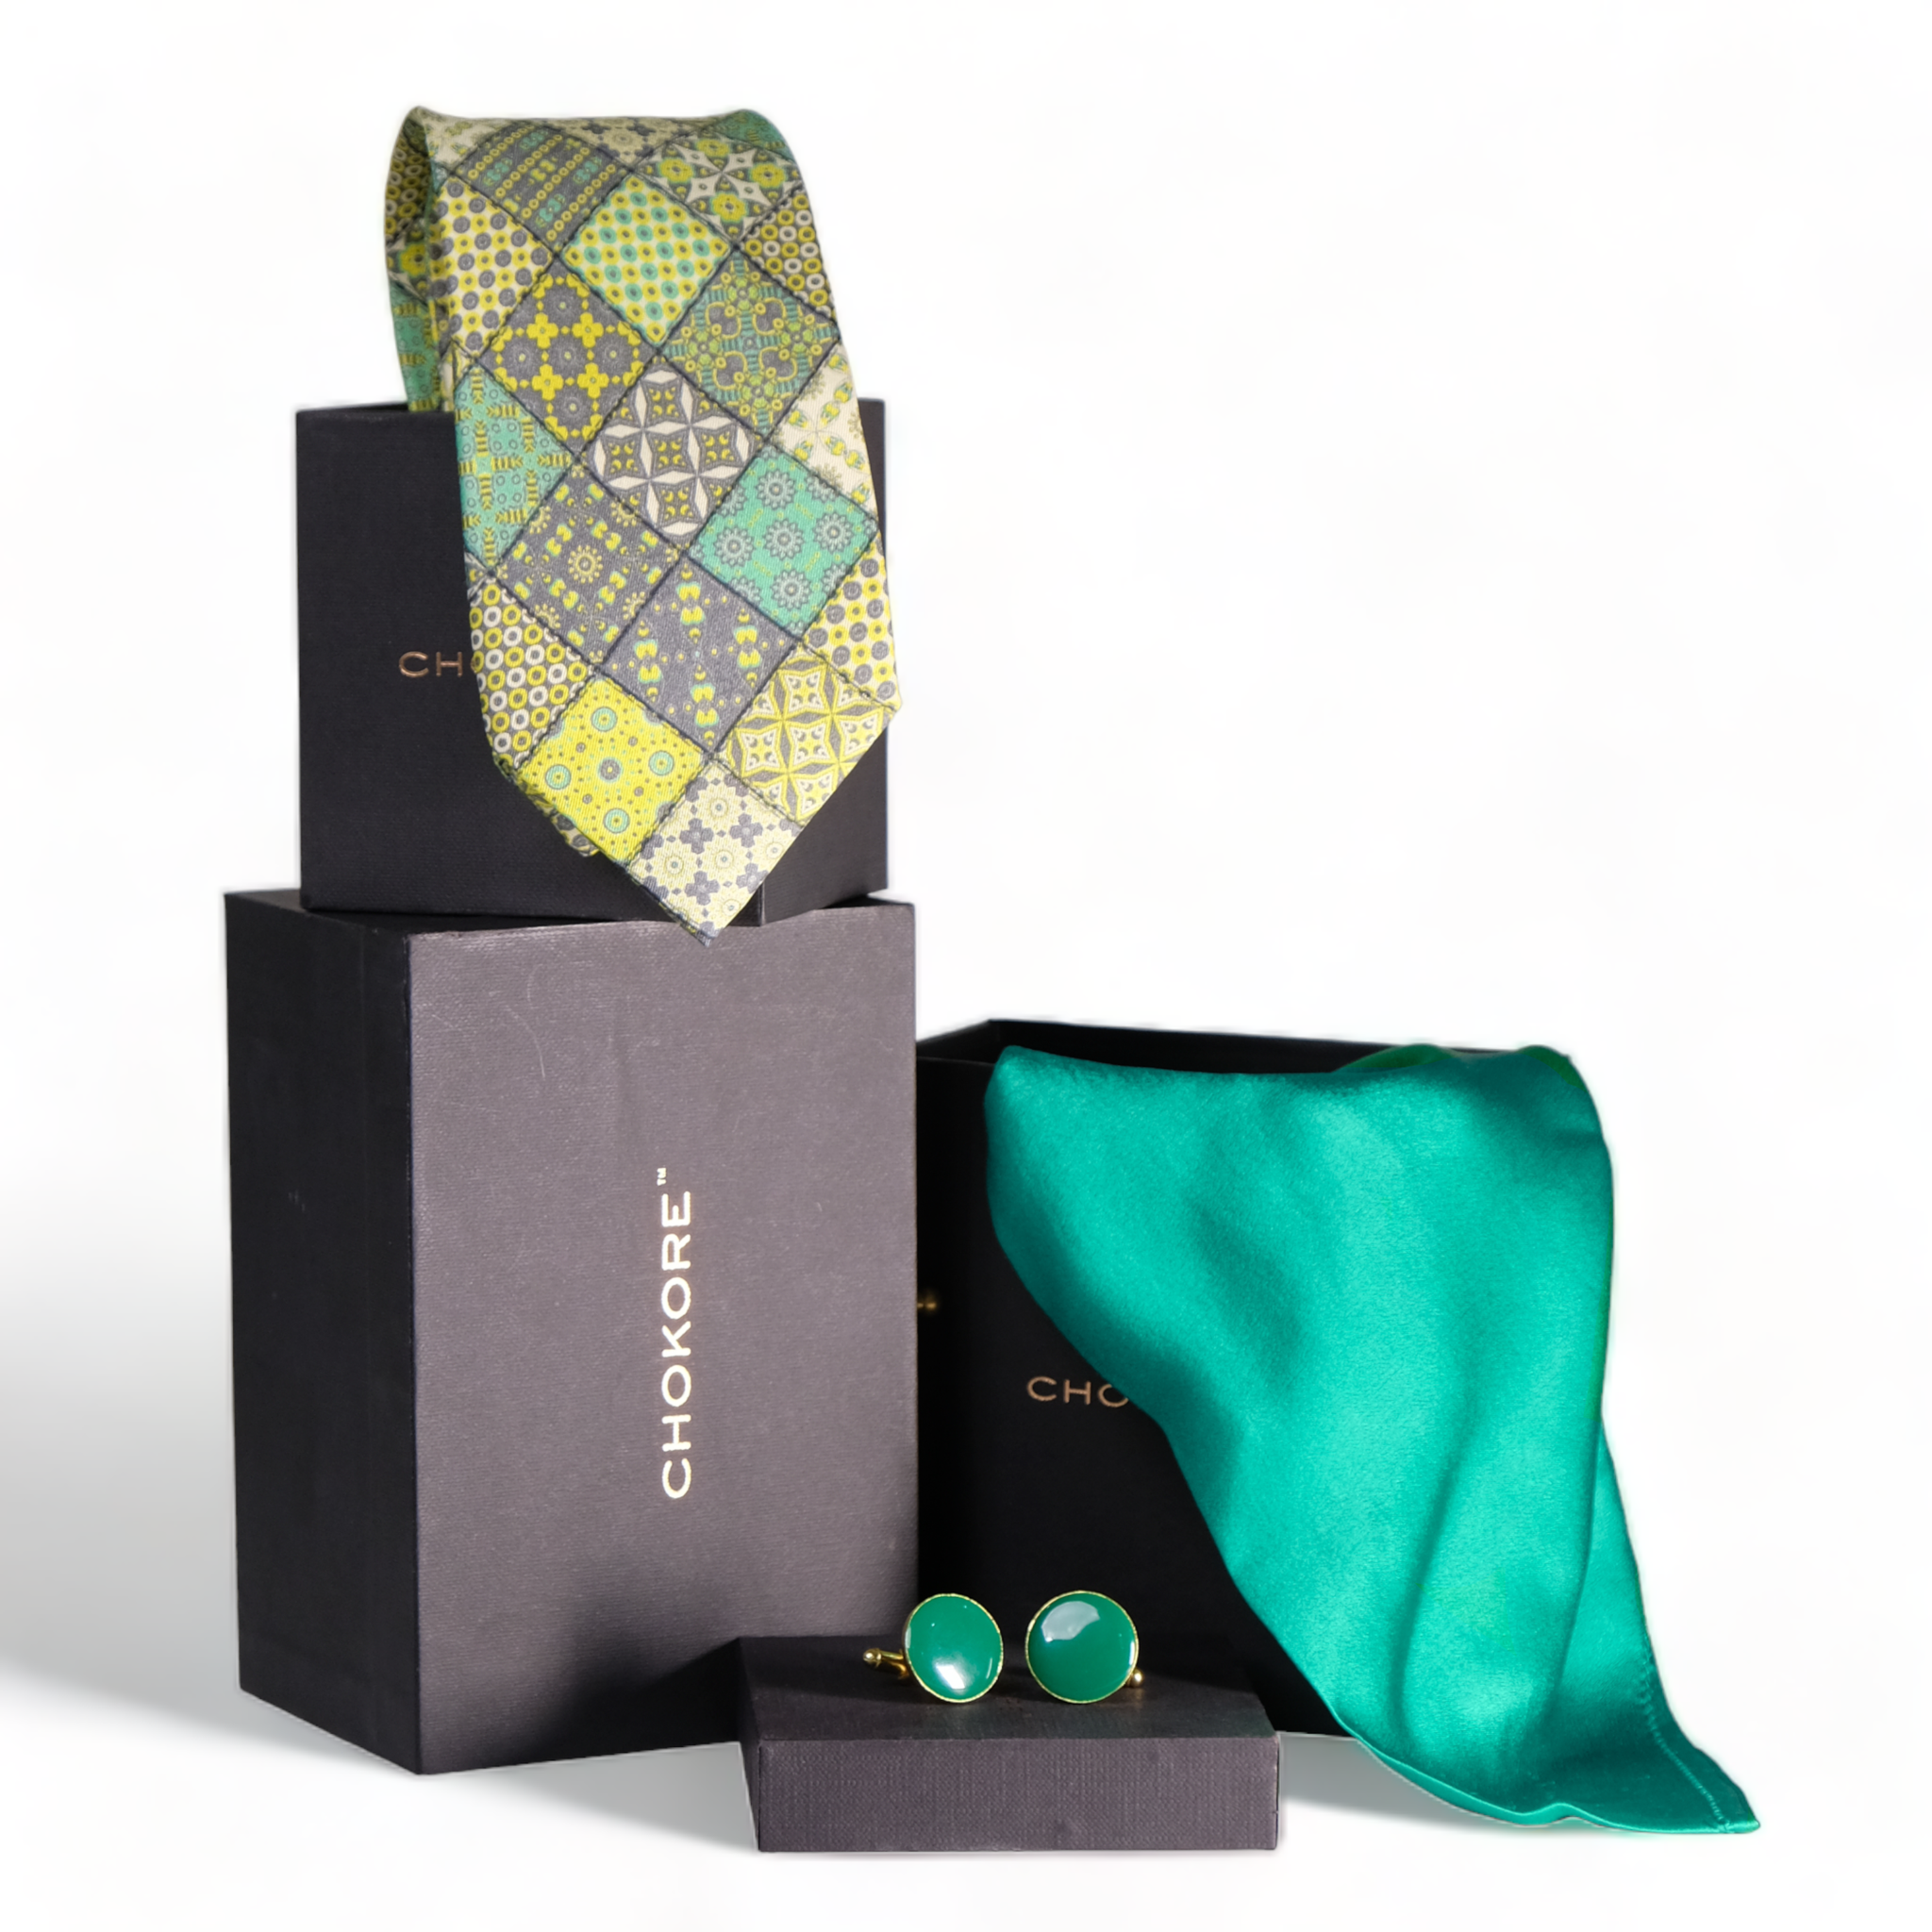 Chokore Special 3-in-1 Gift Set for Him (Turquoise Pocket Square, Necktie, & Cufflinks)